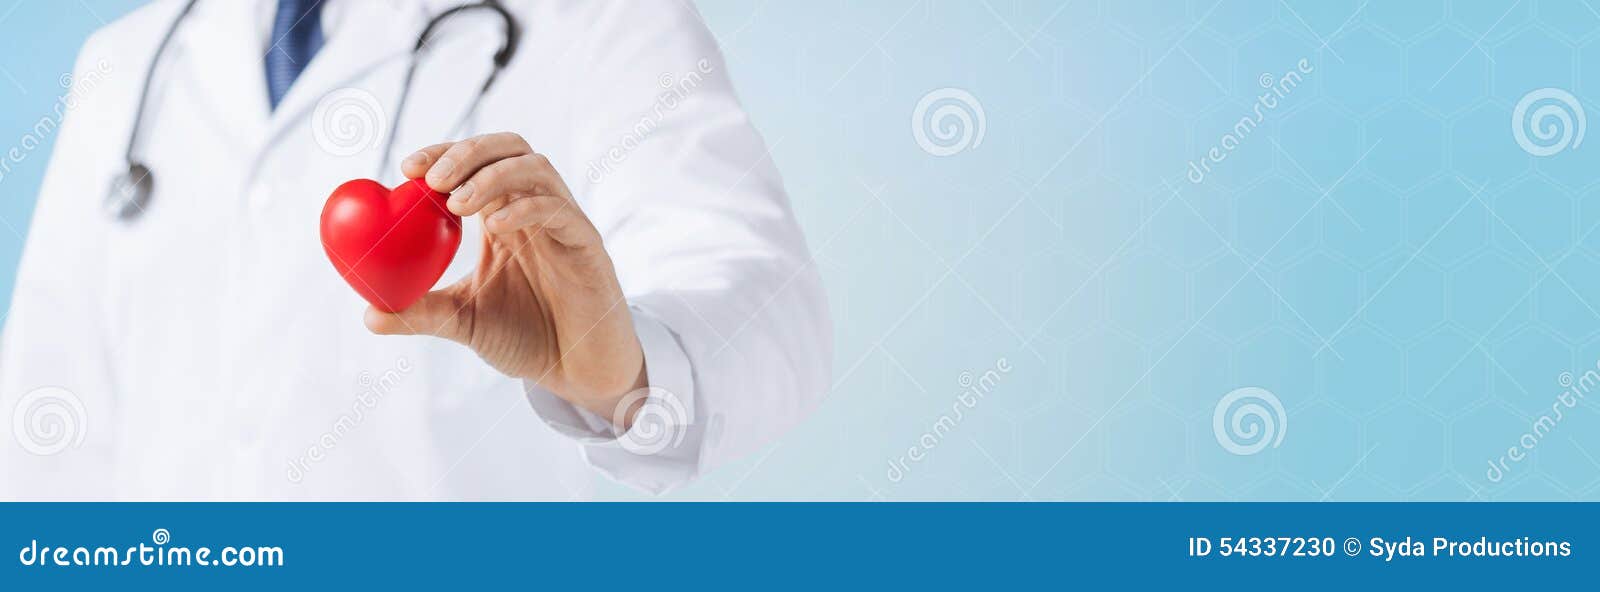 close up of male doctor hand holding red heart